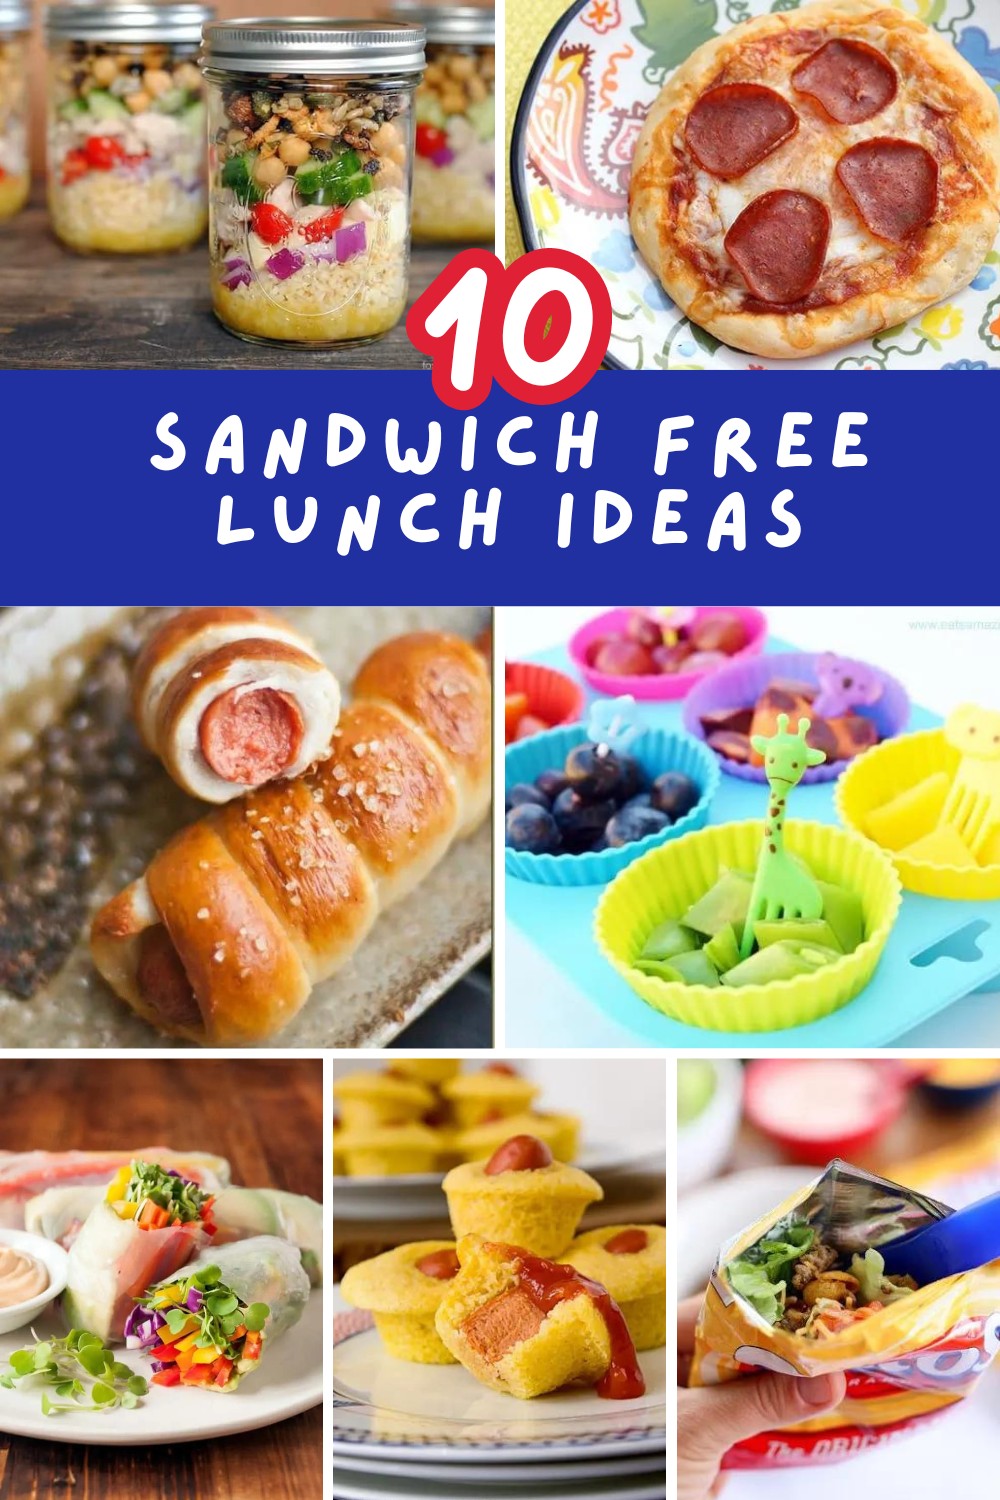 Tired of the same old sandwich? Discover 10 mouthwatering sandwich alternatives perfect for your lunch box! Packed with flavor and nutrition, these ideas are great for both kids and adults. Get inspired to try something new today! 🥒🍴 #HealthyEating #LunchInspo #FamilyFriendly